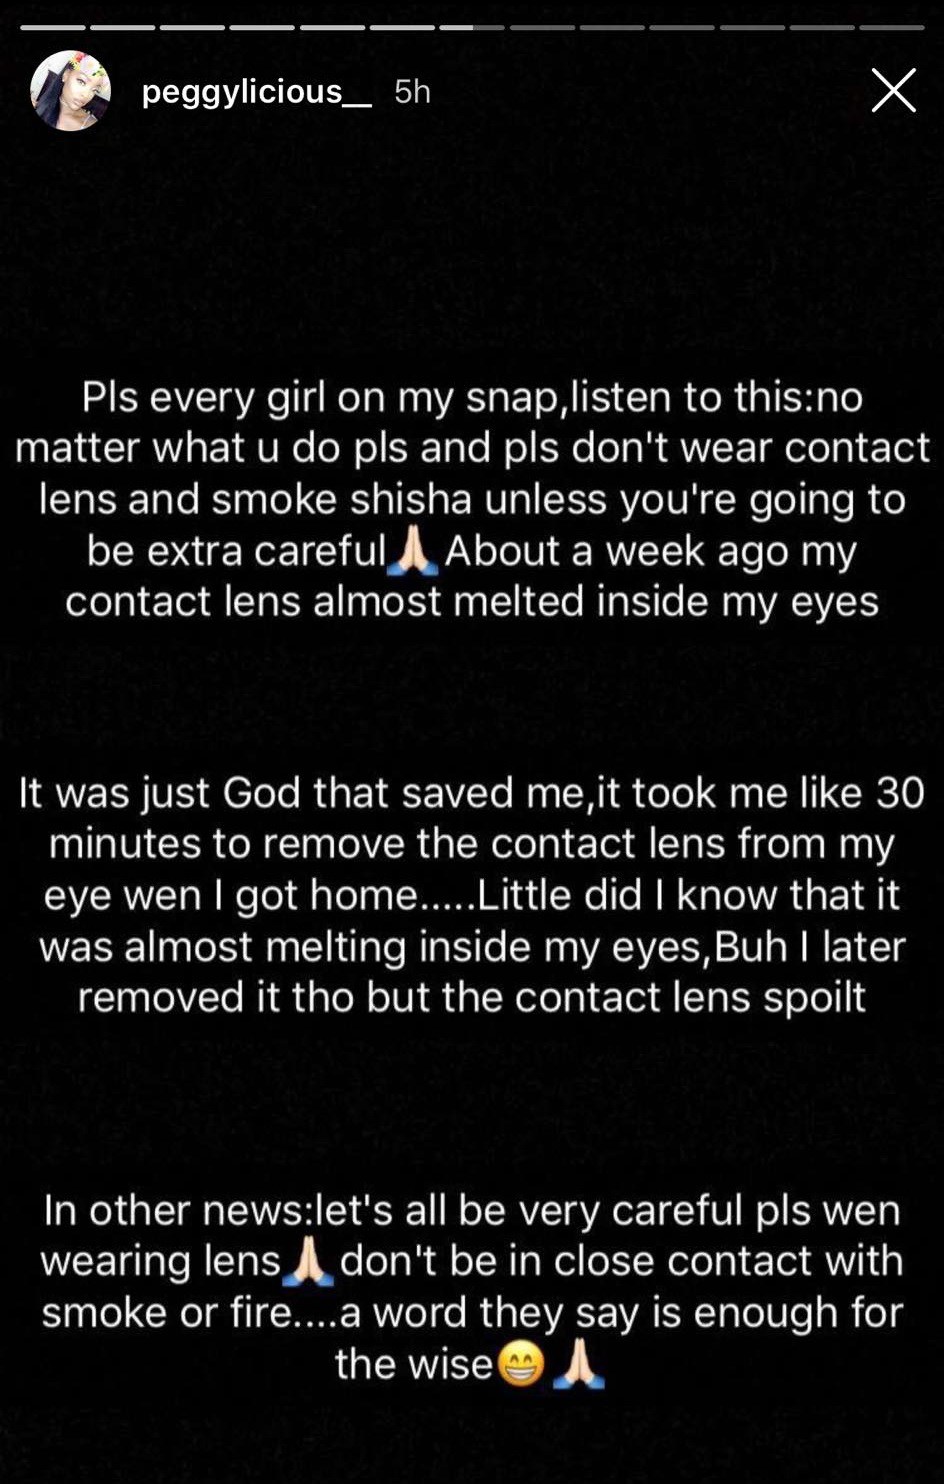 Nigerian Lady warns against smoking shisha while wearing contact lens, narrates her experience